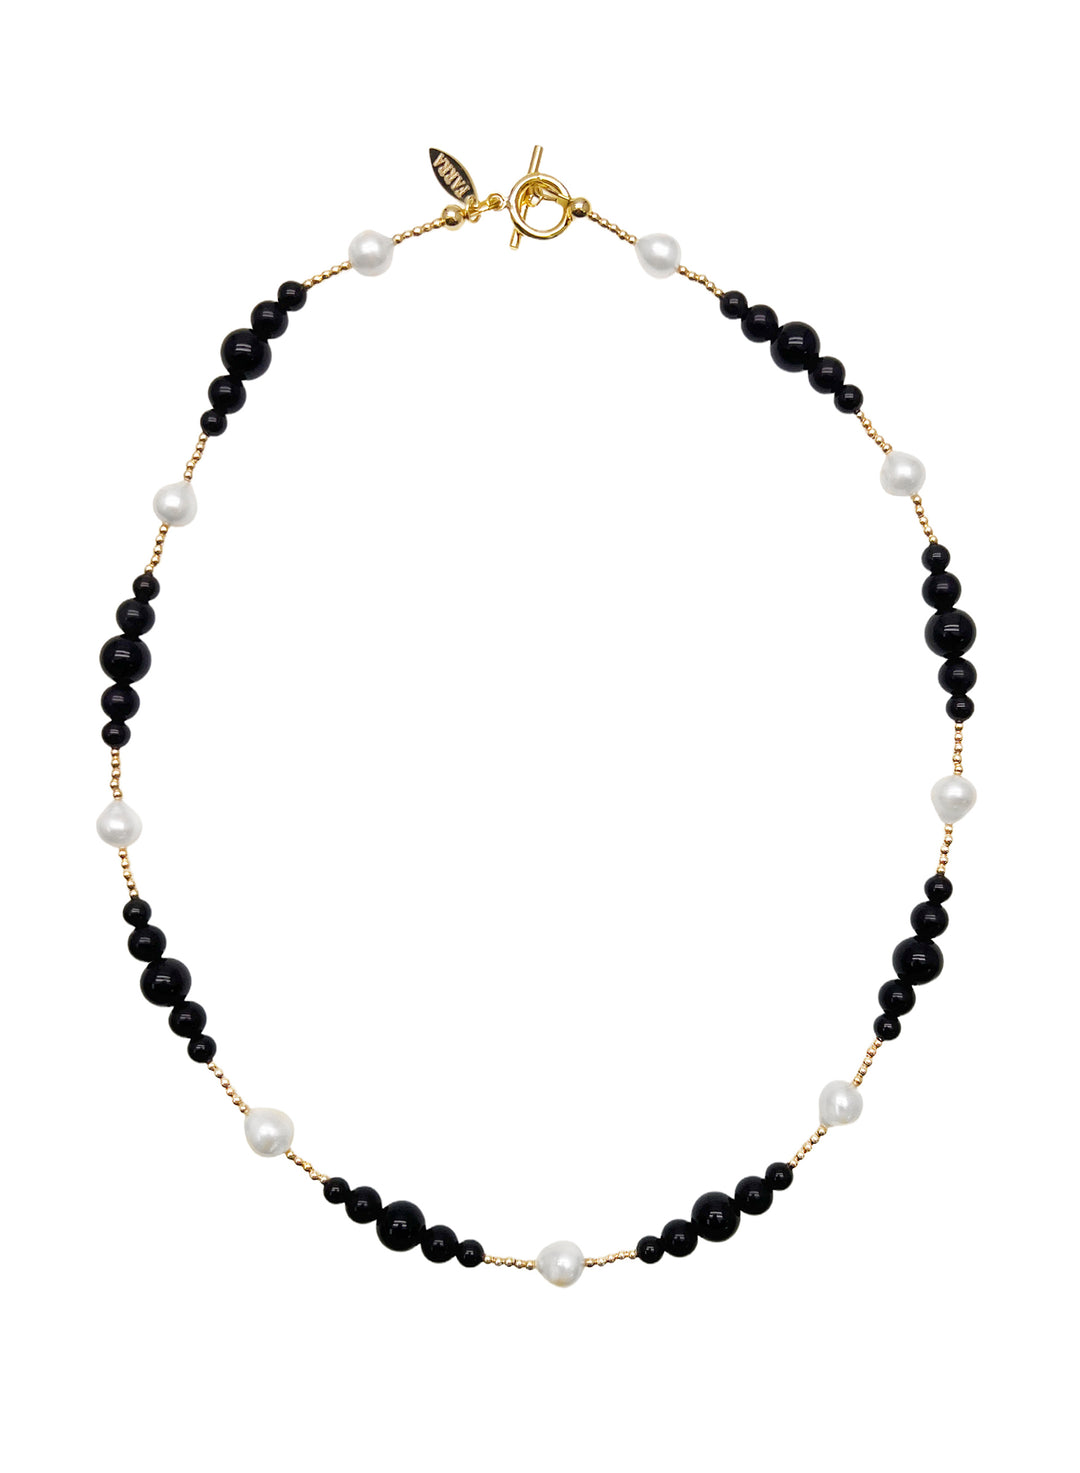 Exquisite Black Obsidian and White Freshwater Pearls Necklace LN071 - FARRA